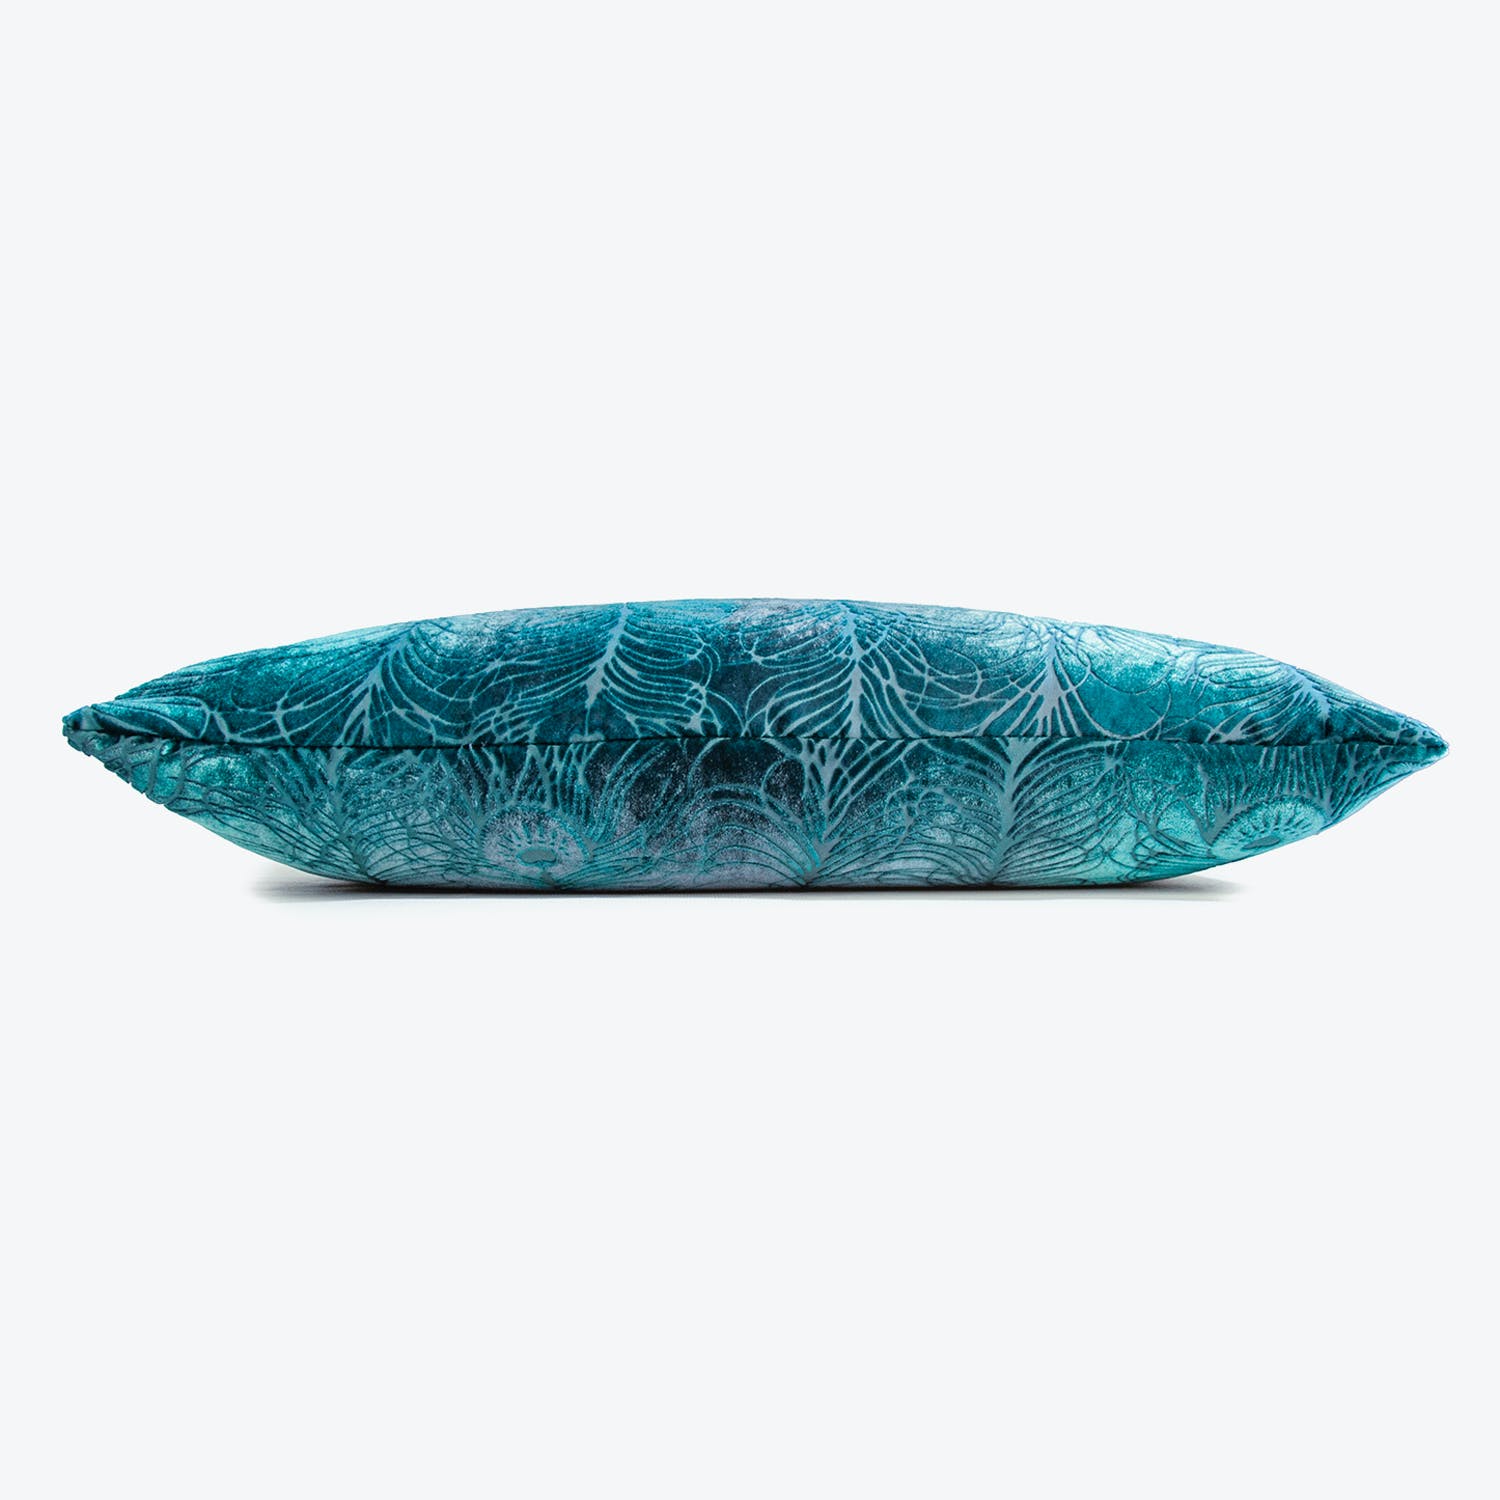 Vibrant teal leaf patterned pillow with plush, elongated shape.